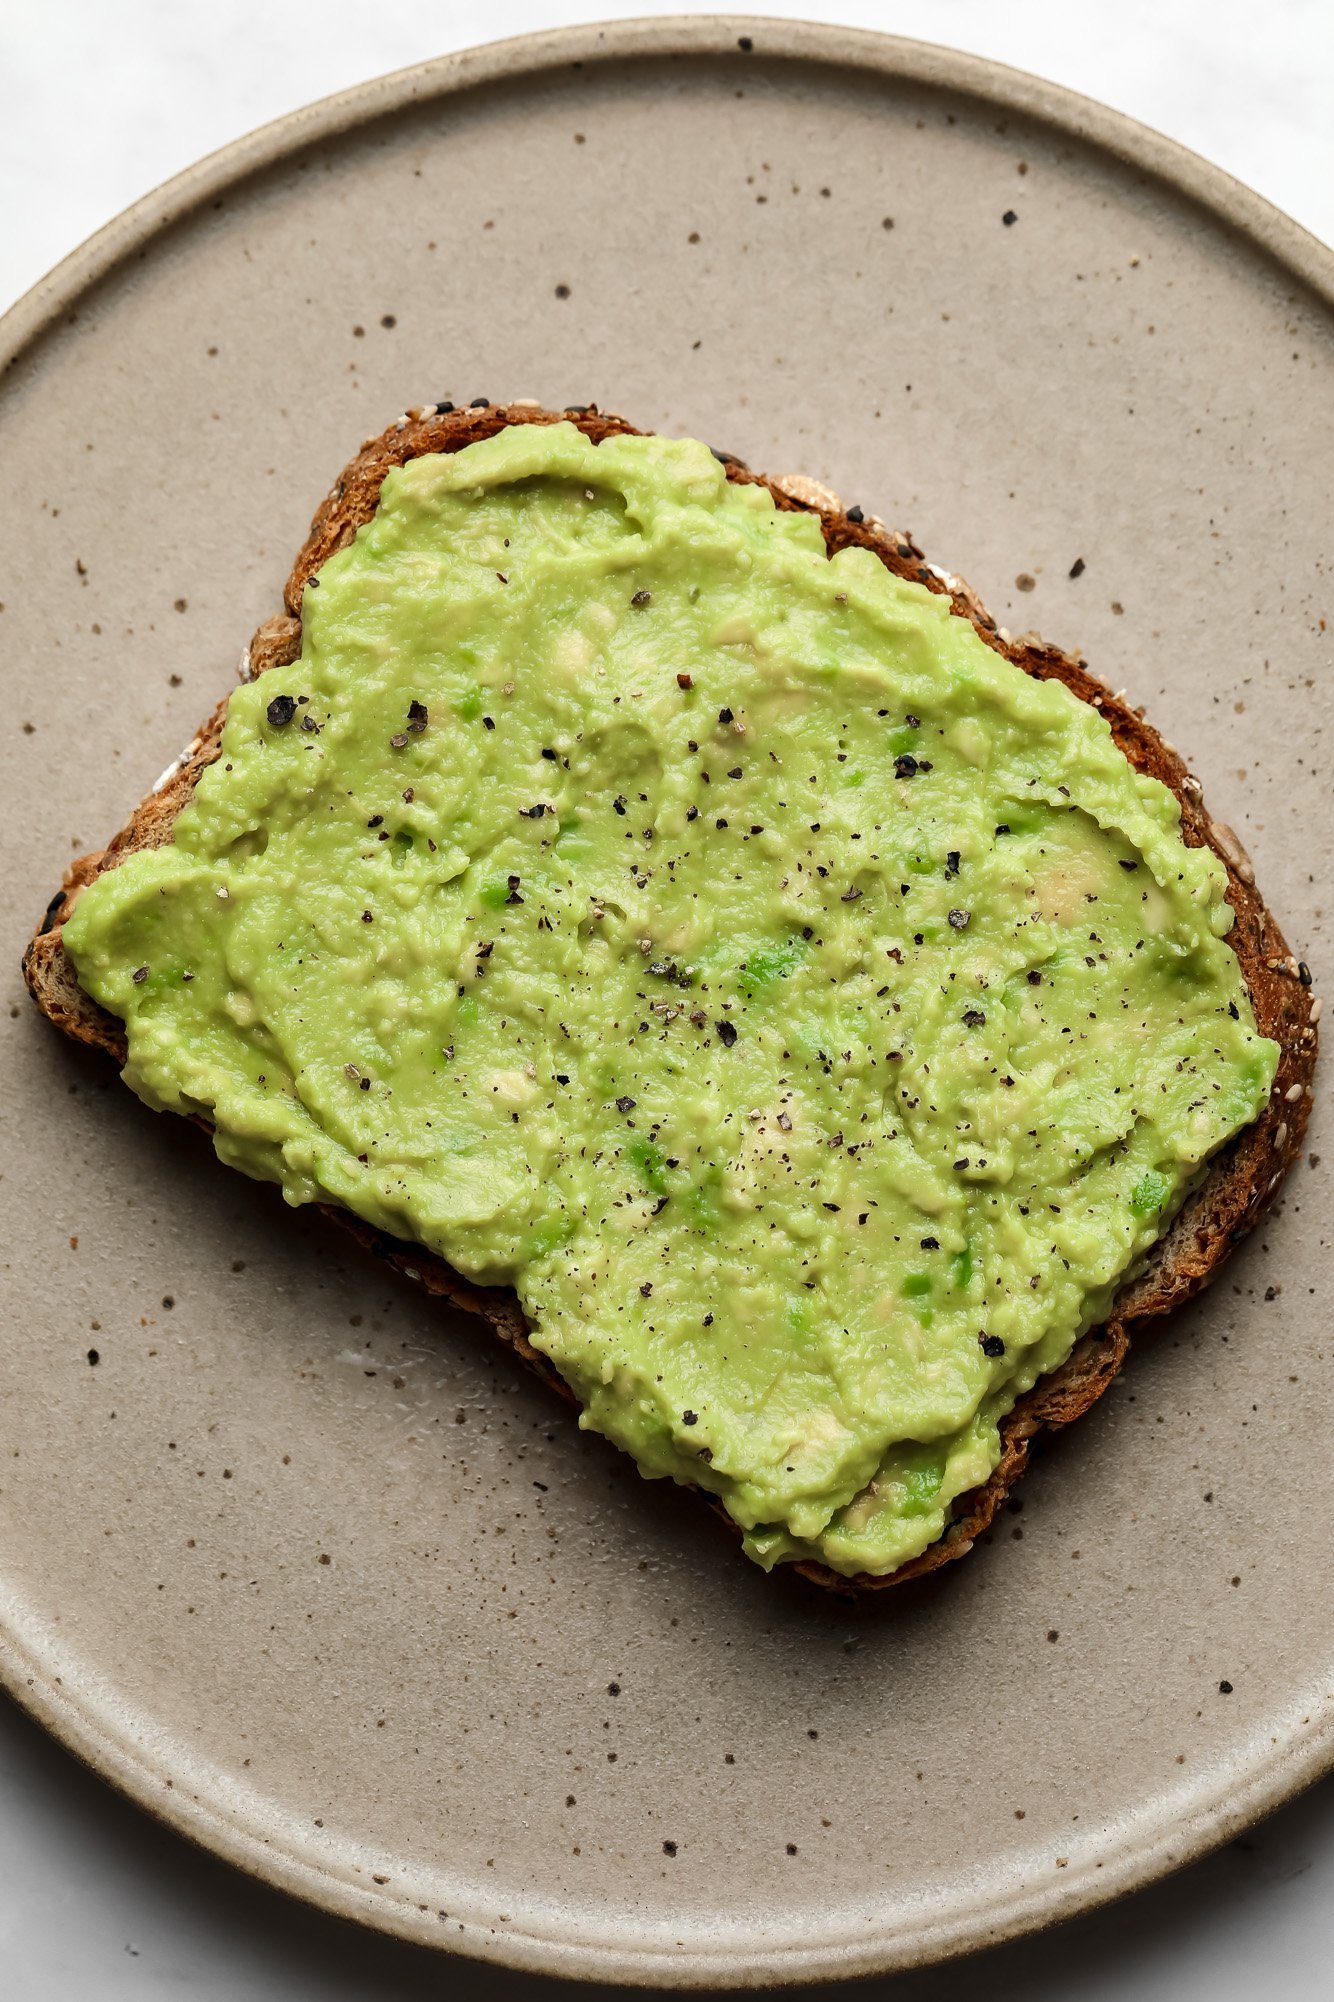 mashed avocado spread on a piece of toast.